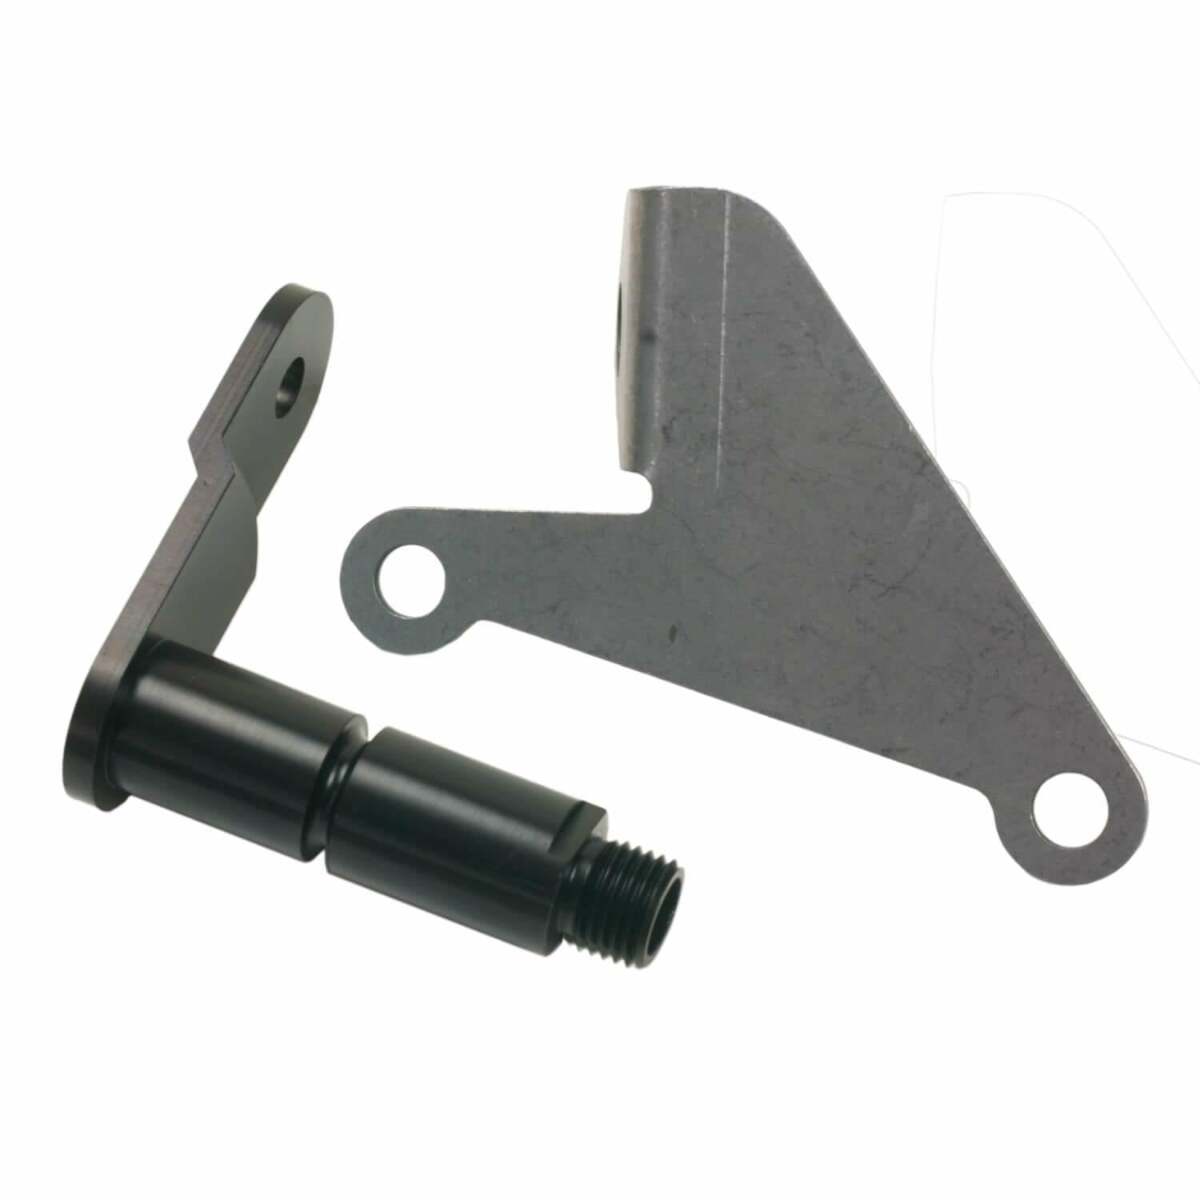 B&M Cable Bracket & Shift Lever Kit - Ford - 40496